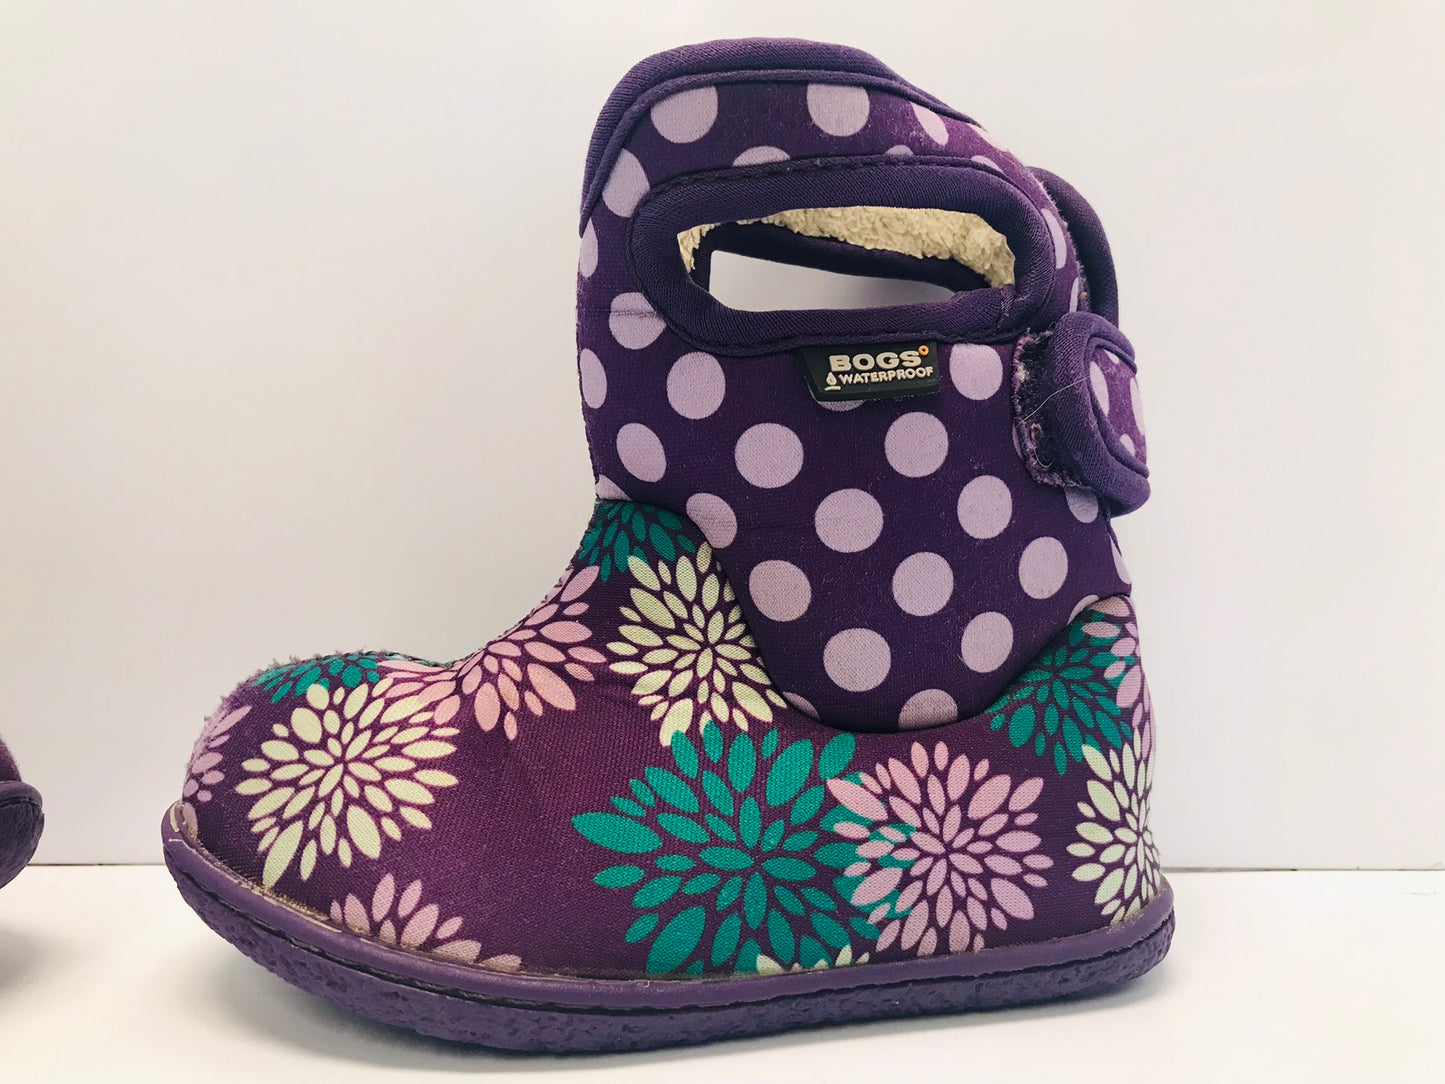 Winter Boots Baby Toddler Bogs Size 7 Rubber Soles - 10 Degree Neoprene Purple Flowers  Excellent